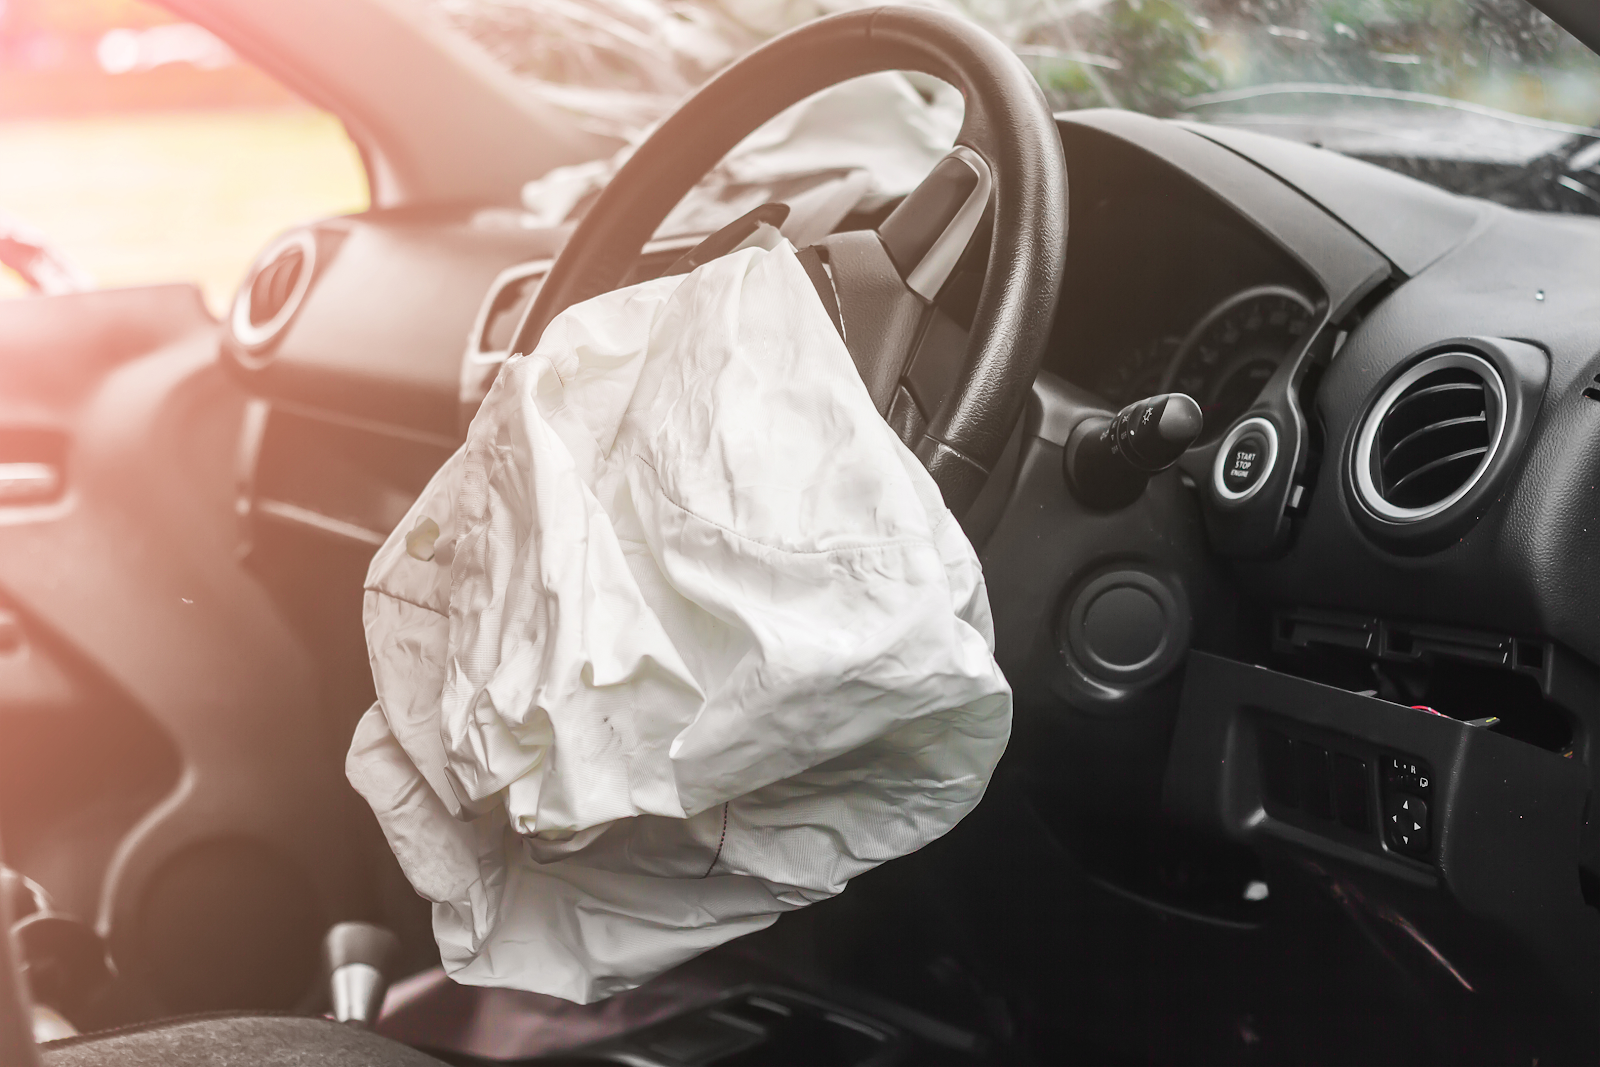 airbag deployed from a distracted driving accident